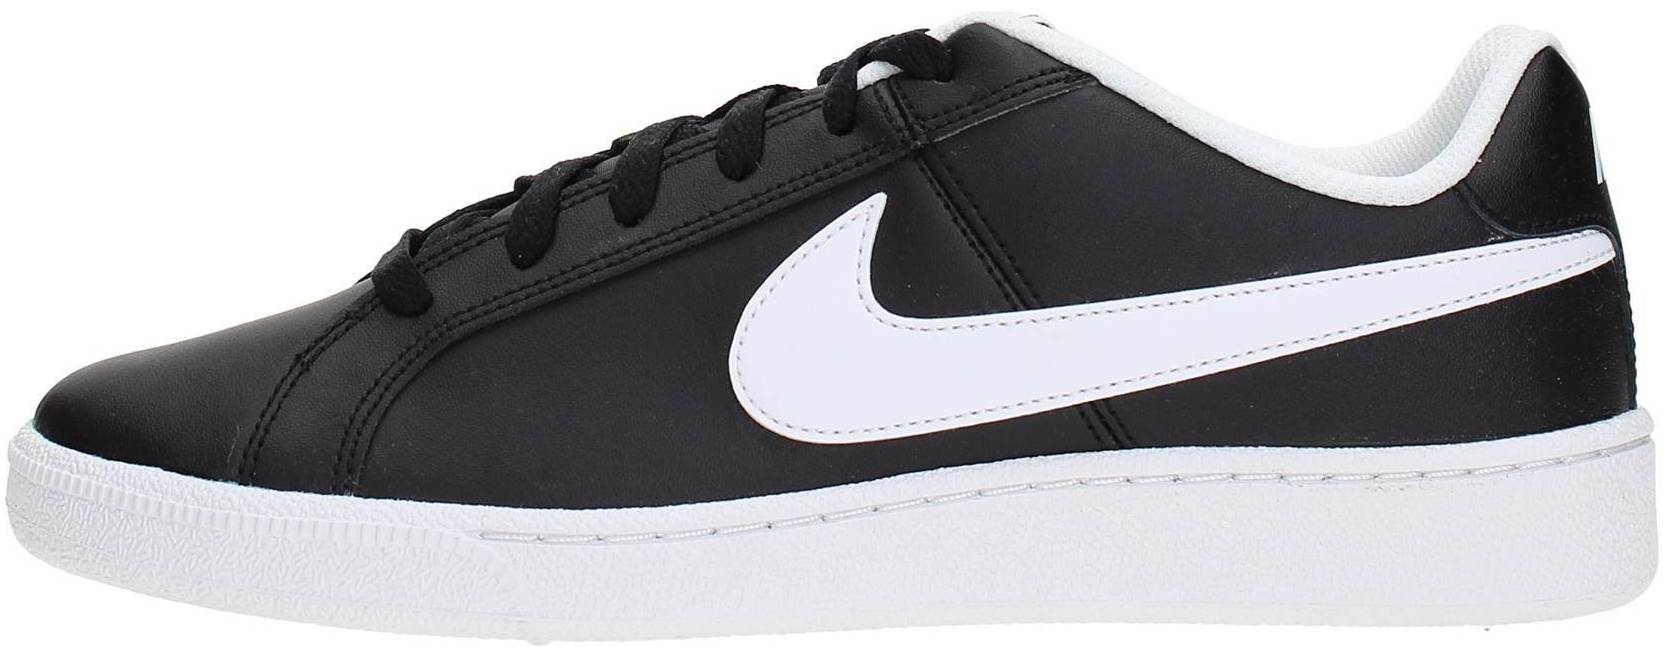 Wetland Discovery Expression Nike Court Royale sneakers in black | RunRepeat